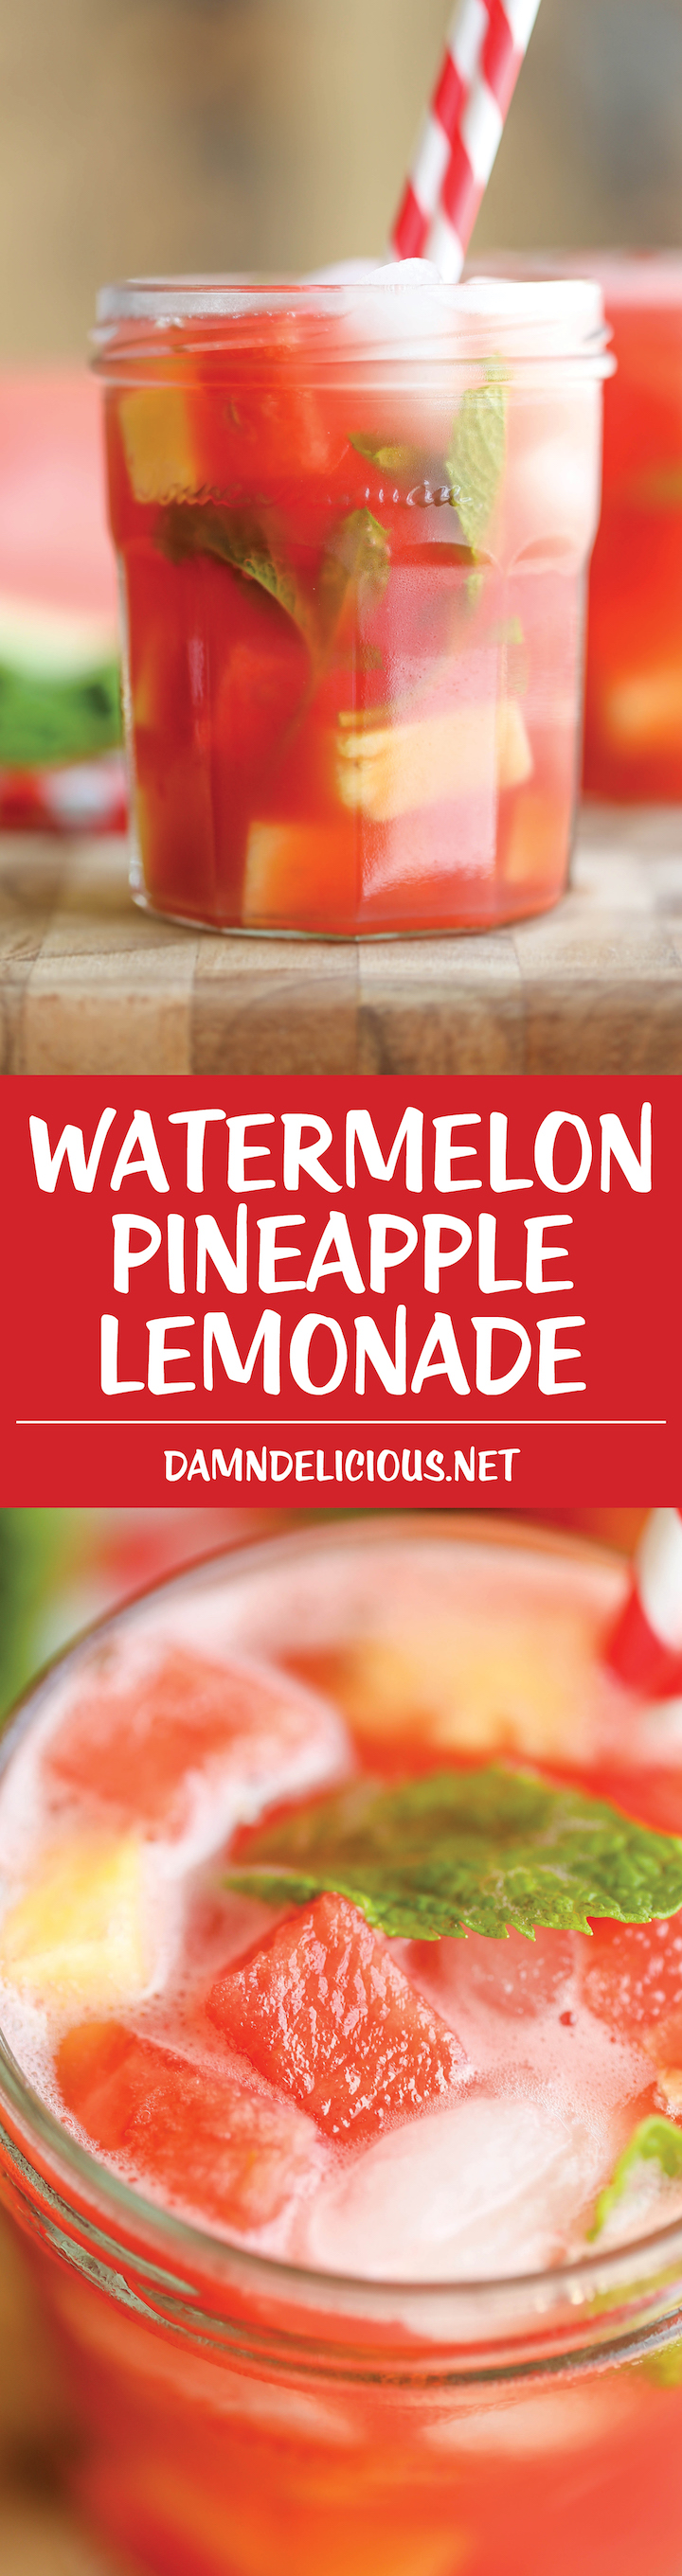 Watermelon Pineapple Lemonade - A fun twist on the traditional lemonade that's wonderfully tangy, sweet, refreshing and incredibly easy to whip up!